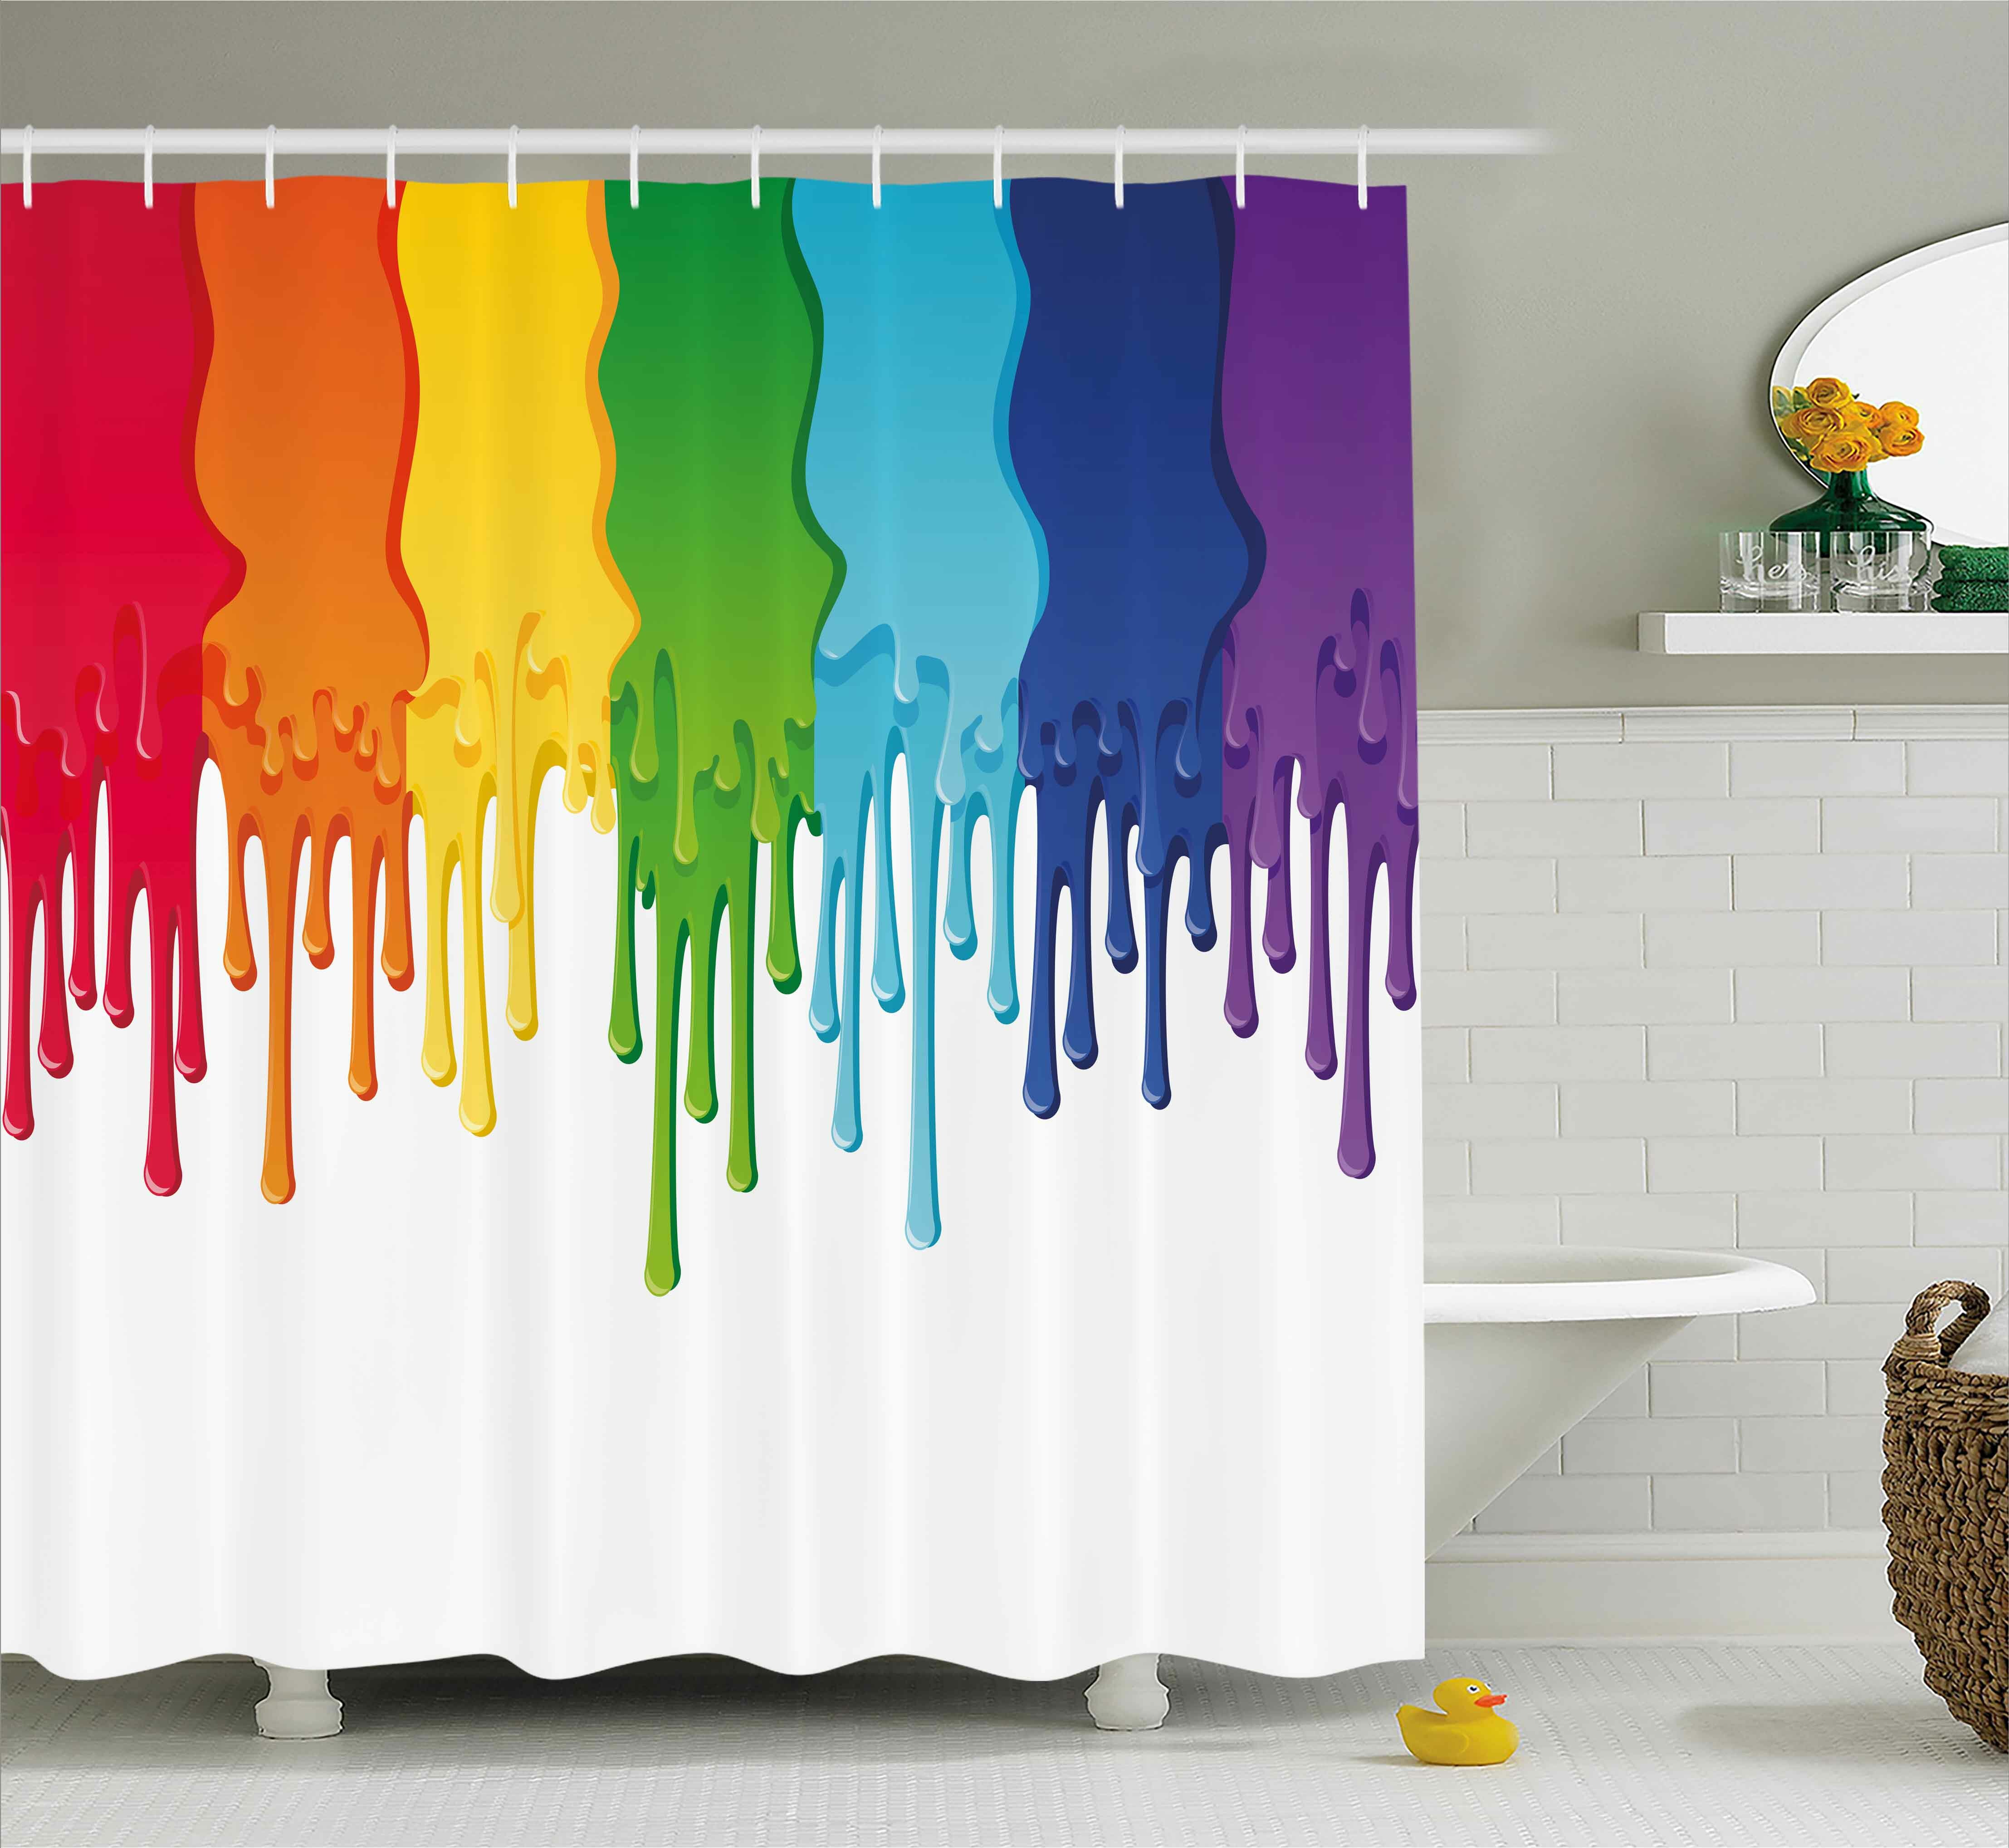 71 x 74 Decorative Shower Curtain with 12 Hooks, Leaves Multicolor by  Lisa Nohren